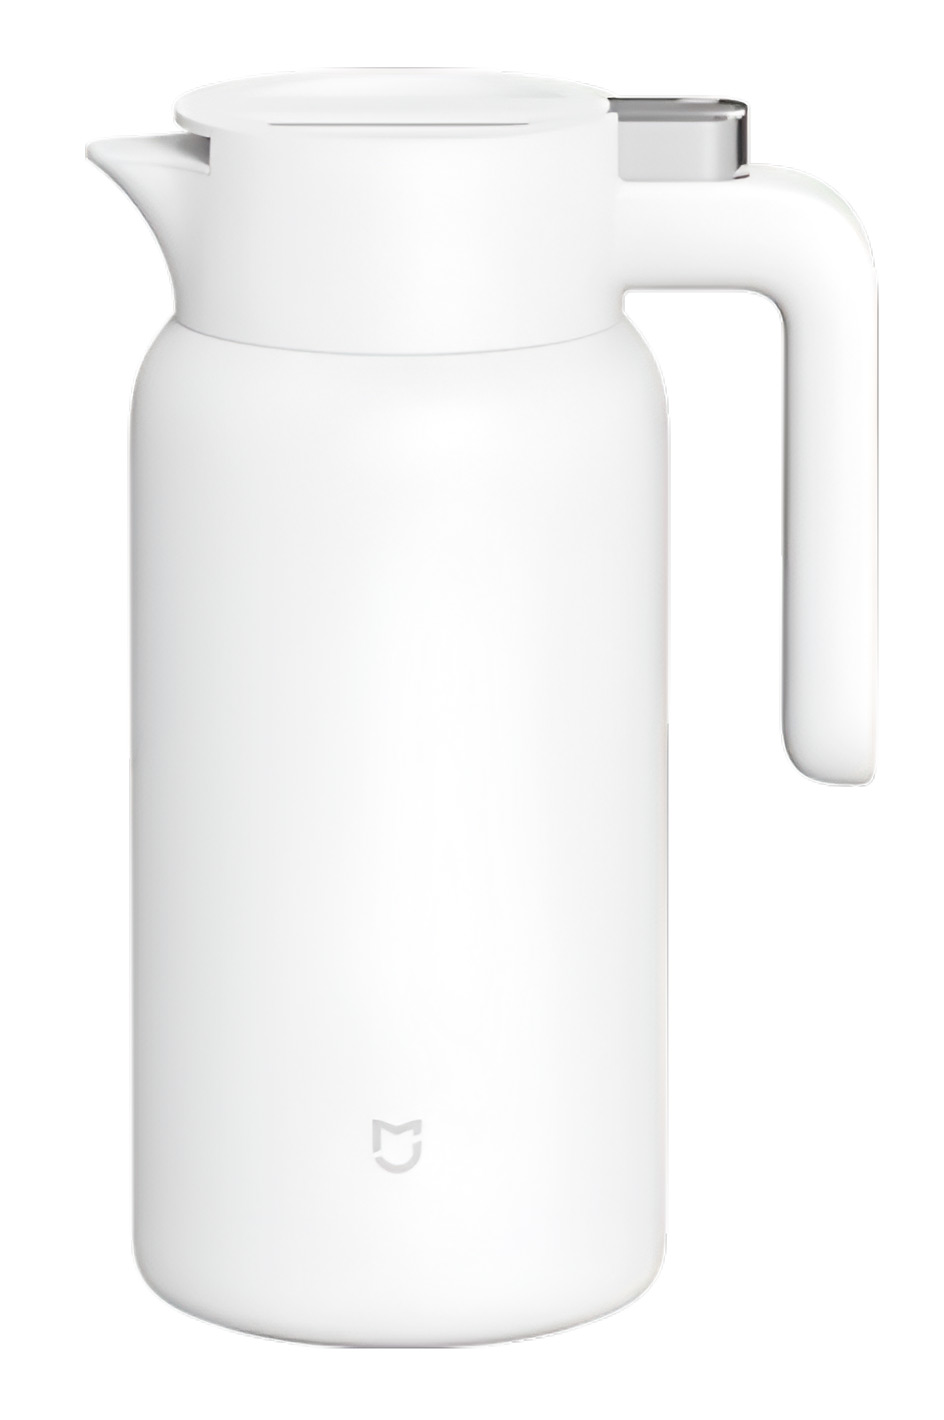 Термос Xiaomi Mijia Thermos Kettle 1.8L (MJBWH01PL) White термос xiaomi quange temperature display thermos kettle bwh 100 white